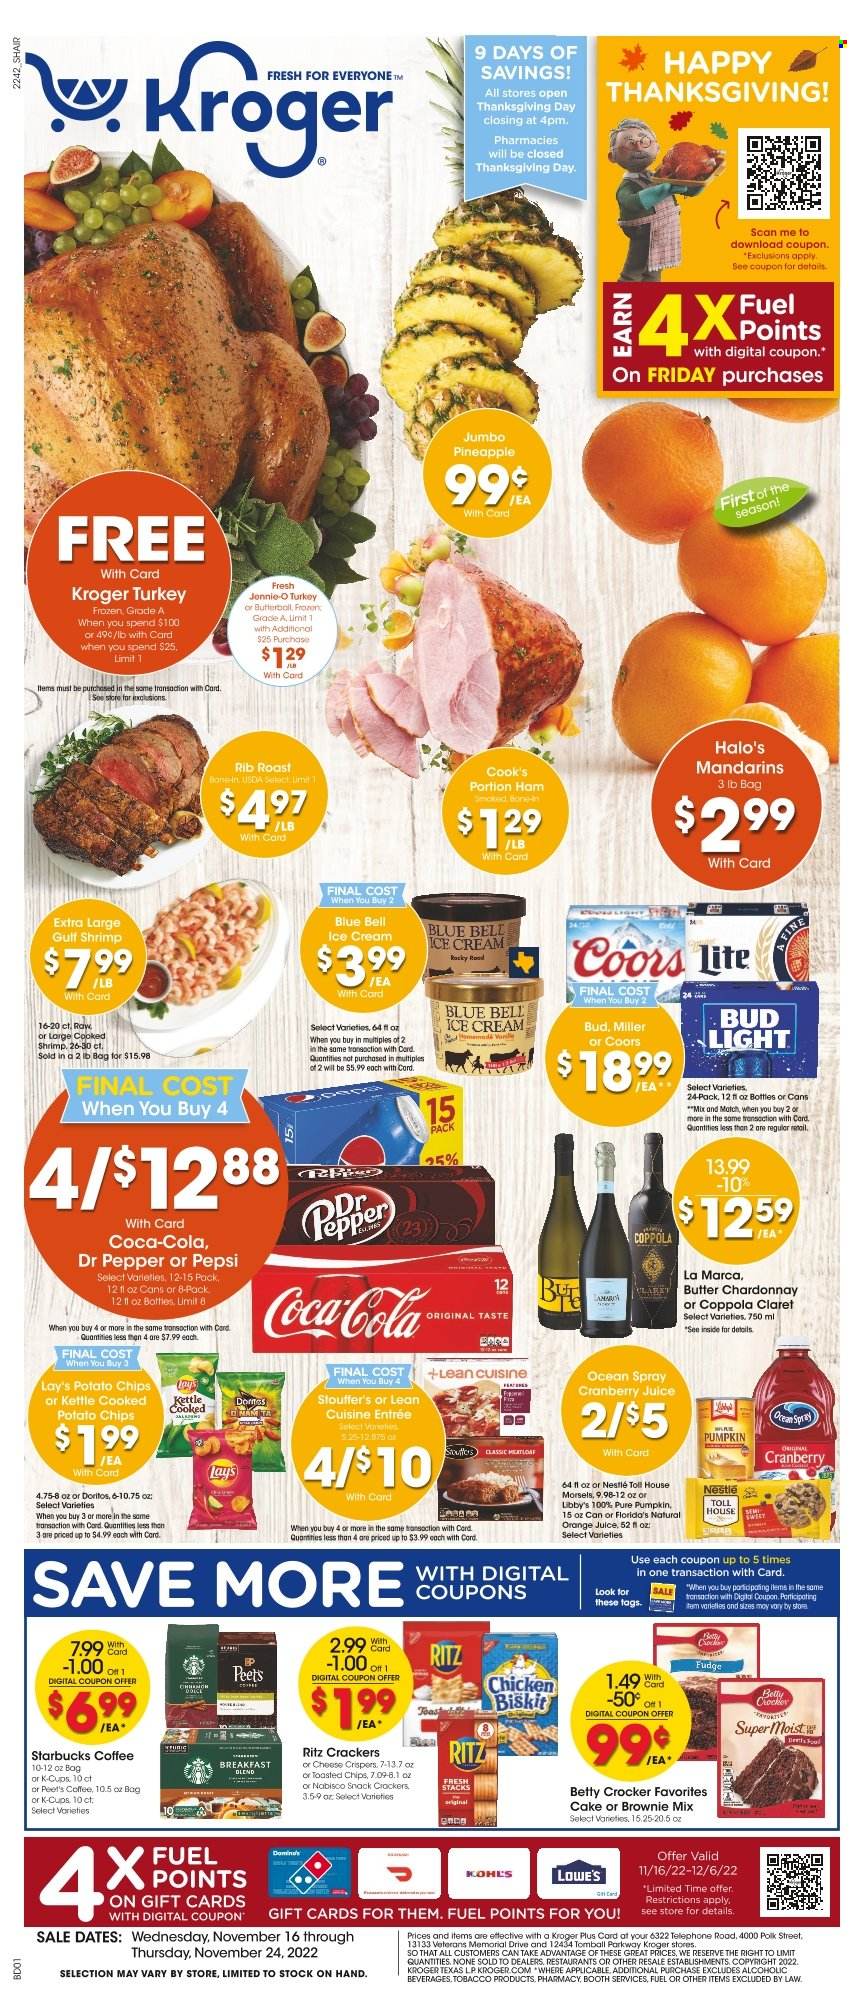 Kroger Flyer - 11/16/2022 - 11/24/2022 - Sales products - cake, brownie mix, mandarines, pineapple, shrimps, meatloaf, Lean Cuisine, Butterball, ham, Cook's, ice cream, Blue Bell, Stouffer's, Fudge, Nestlé, snack, crackers, Florida's Natural, RITZ, Doritos, potato chips, Lay's, Coca-Cola, cranberry juice, Pepsi, orange juice, juice, Dr. Pepper, coffee, Starbucks, coffee capsules, K-Cups, white wine, Chardonnay, wine, beer, Bud Light, Miller, rug, Coors. Page 1.